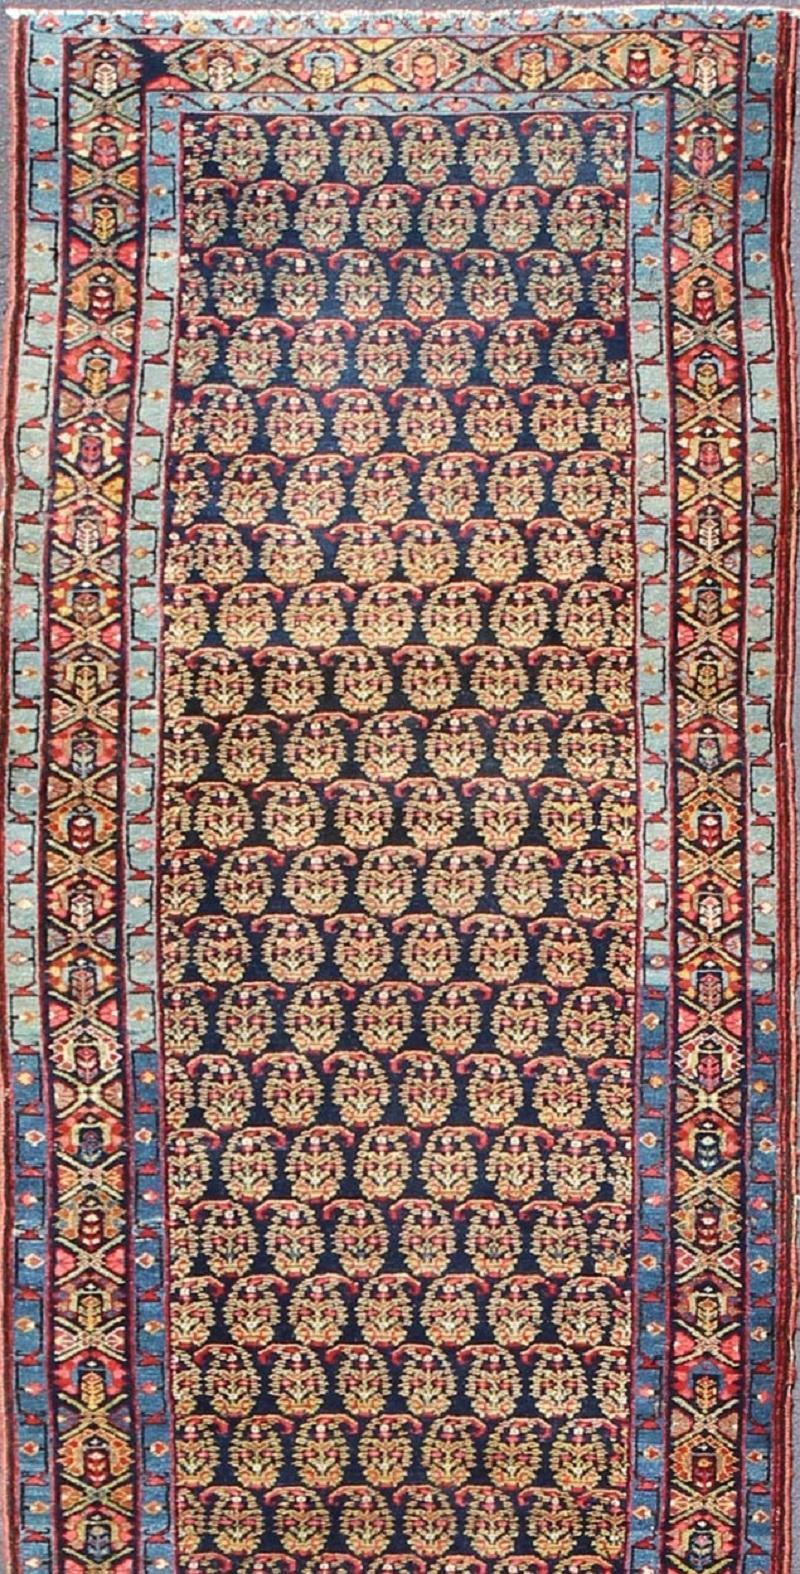 Colorful Antique Persian Malayer Runner with Palmettes in Blue, Orange and Red In Excellent Condition For Sale In Atlanta, GA